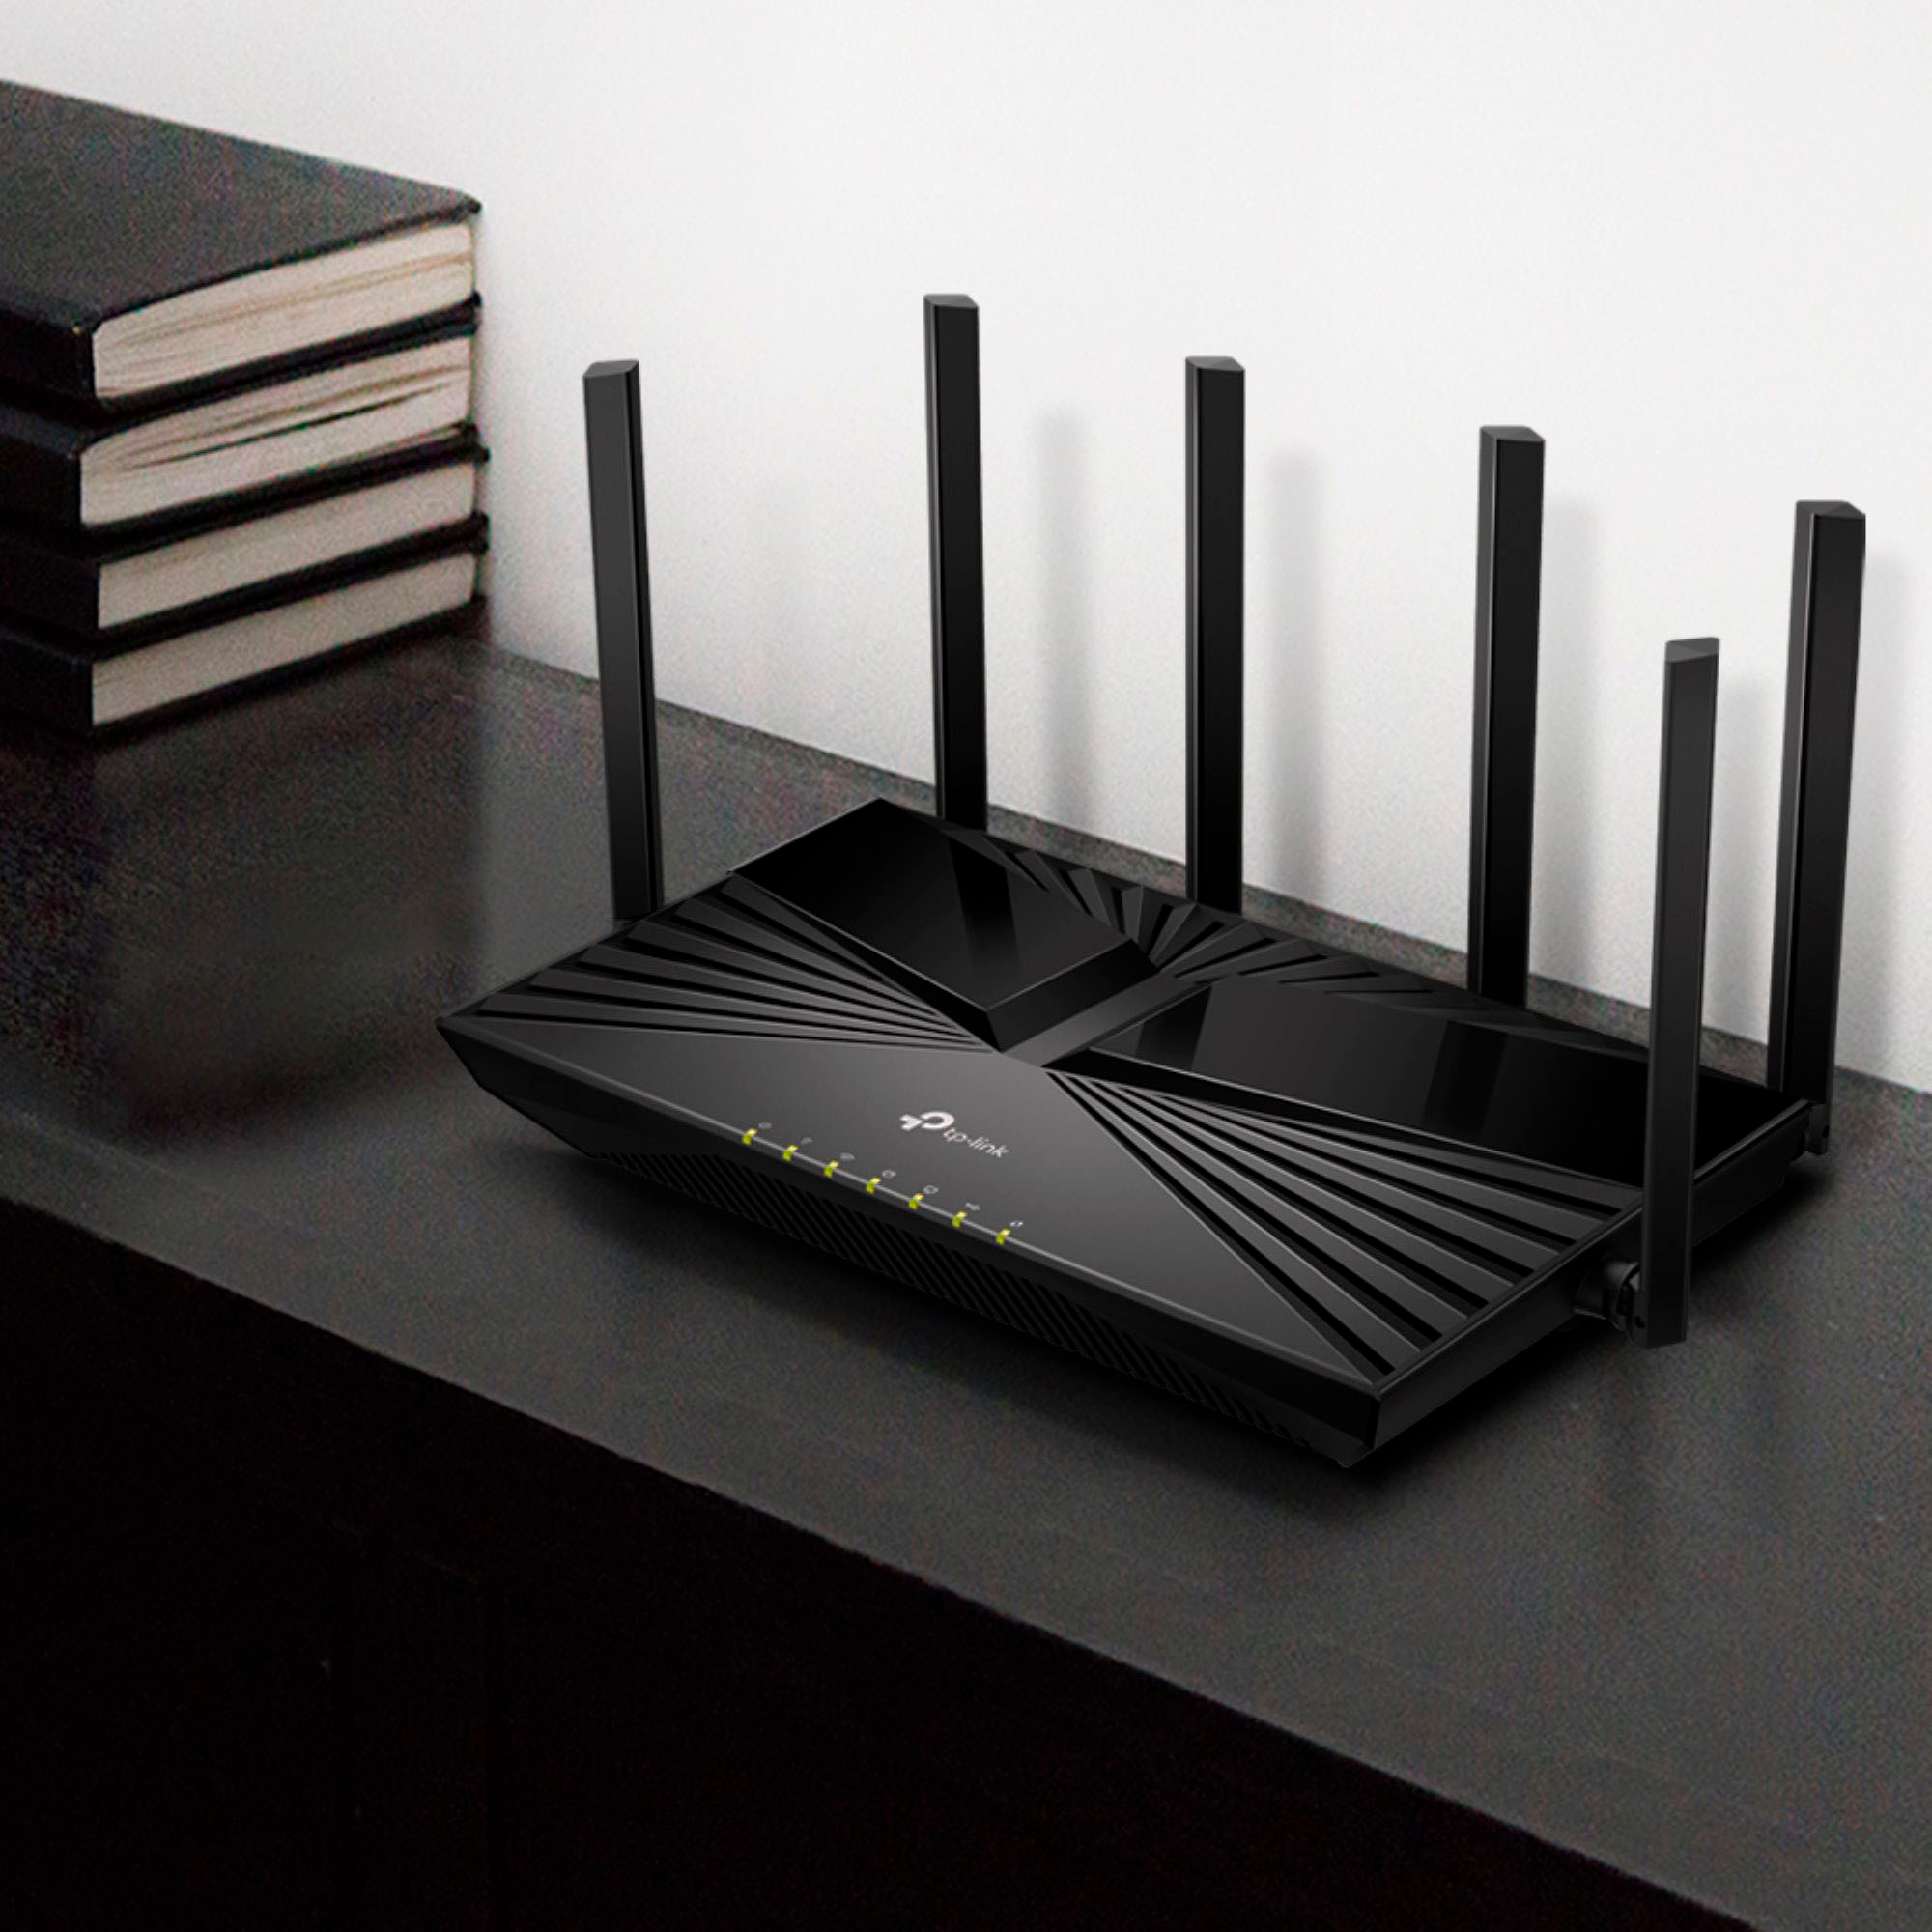 TP-Link Archer AX11000 Tri-Band Wi-Fi 6 Router Black/Red ARCHER AX11000 -  Best Buy